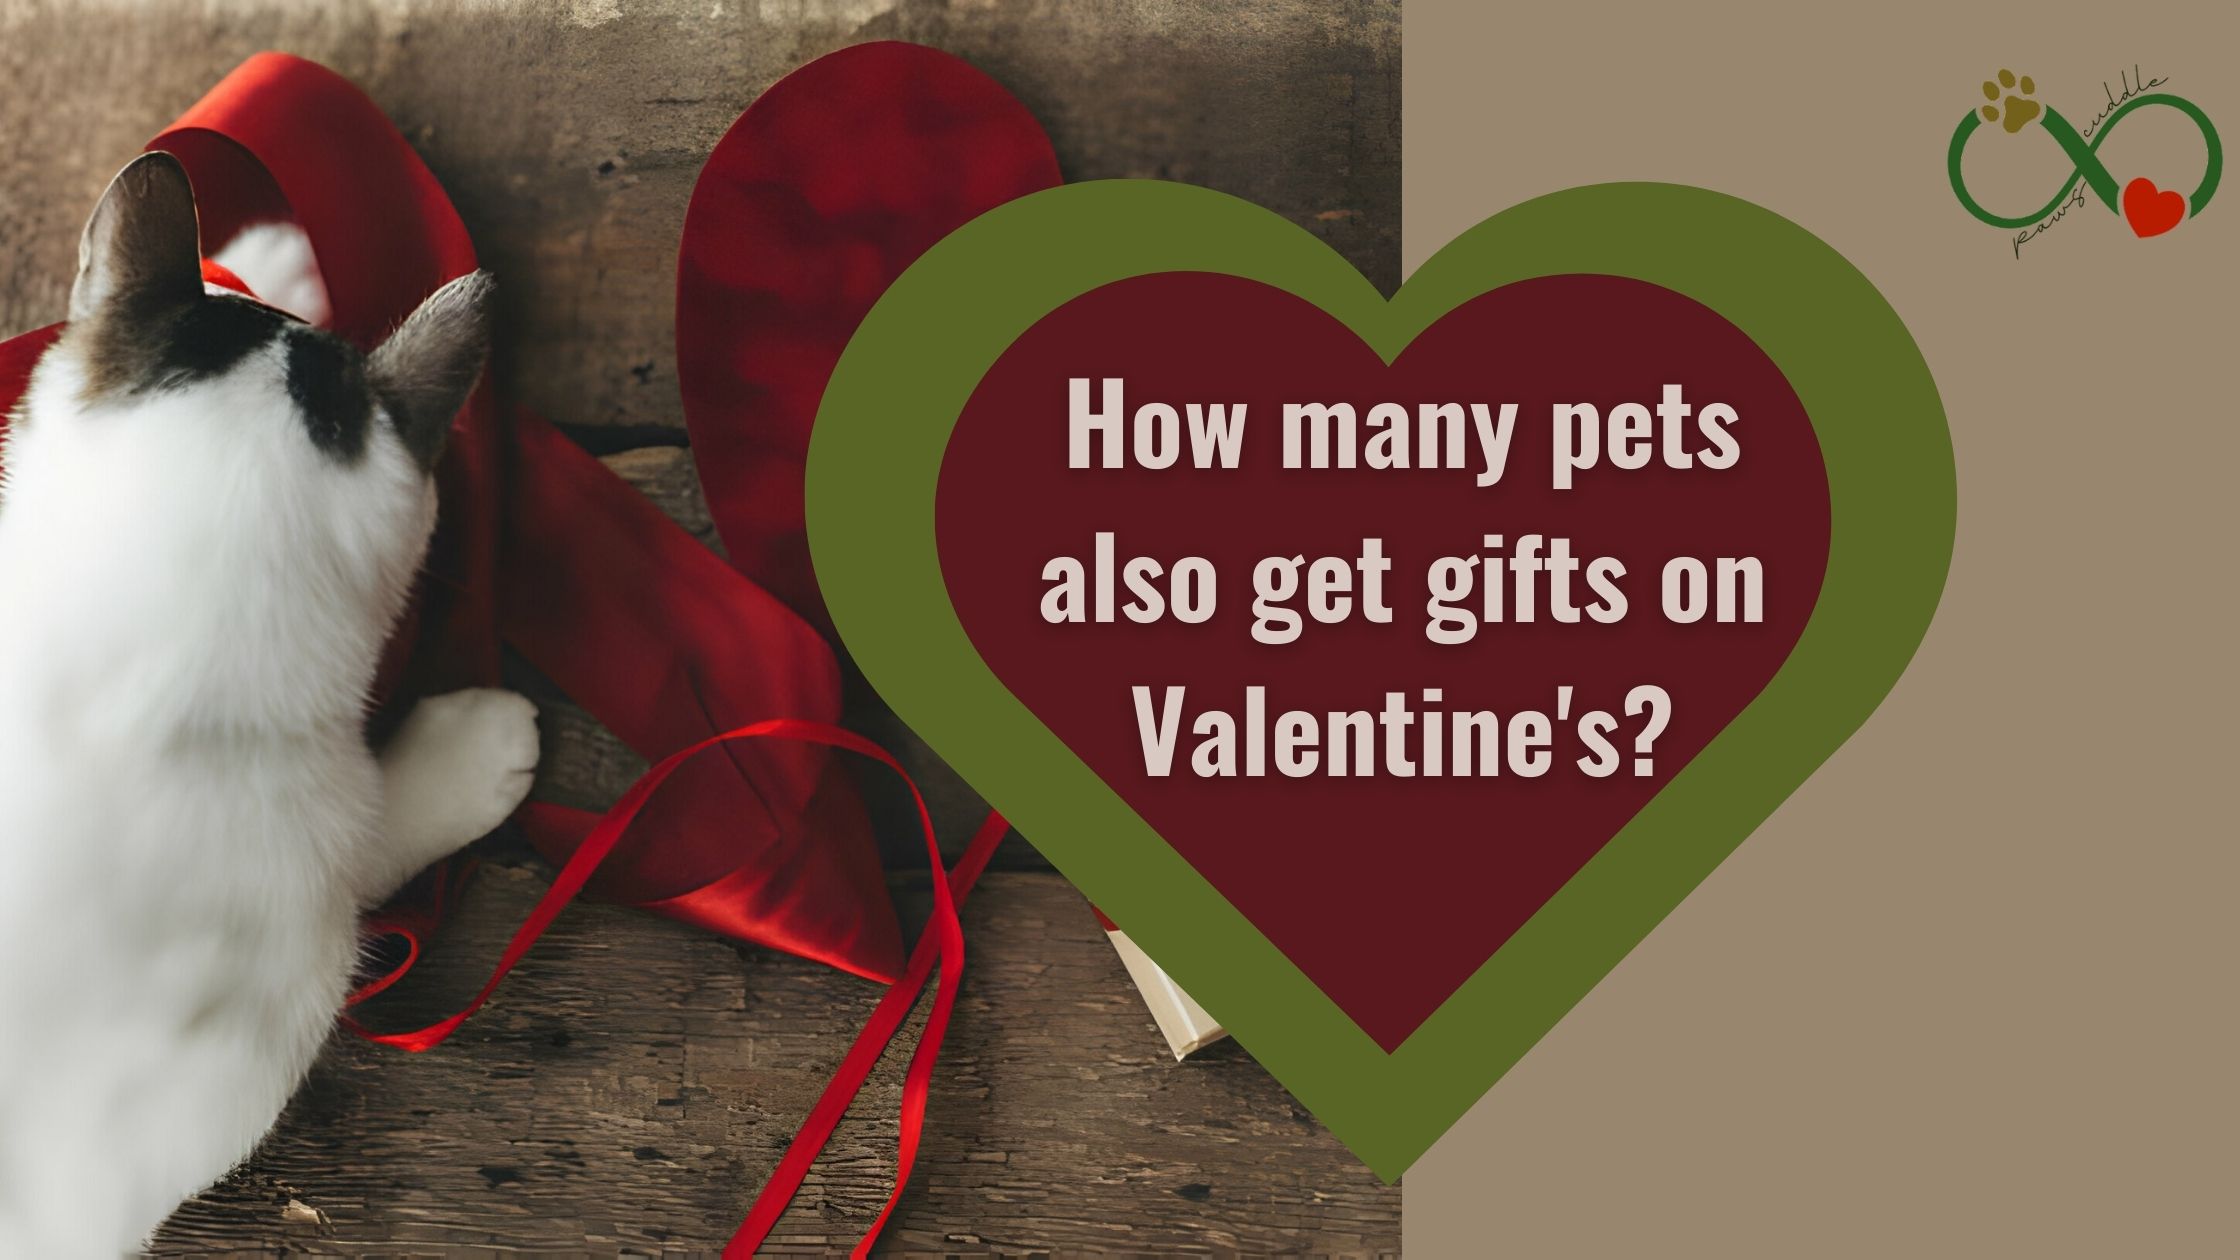 How many pets also get gifts on Valentine's?